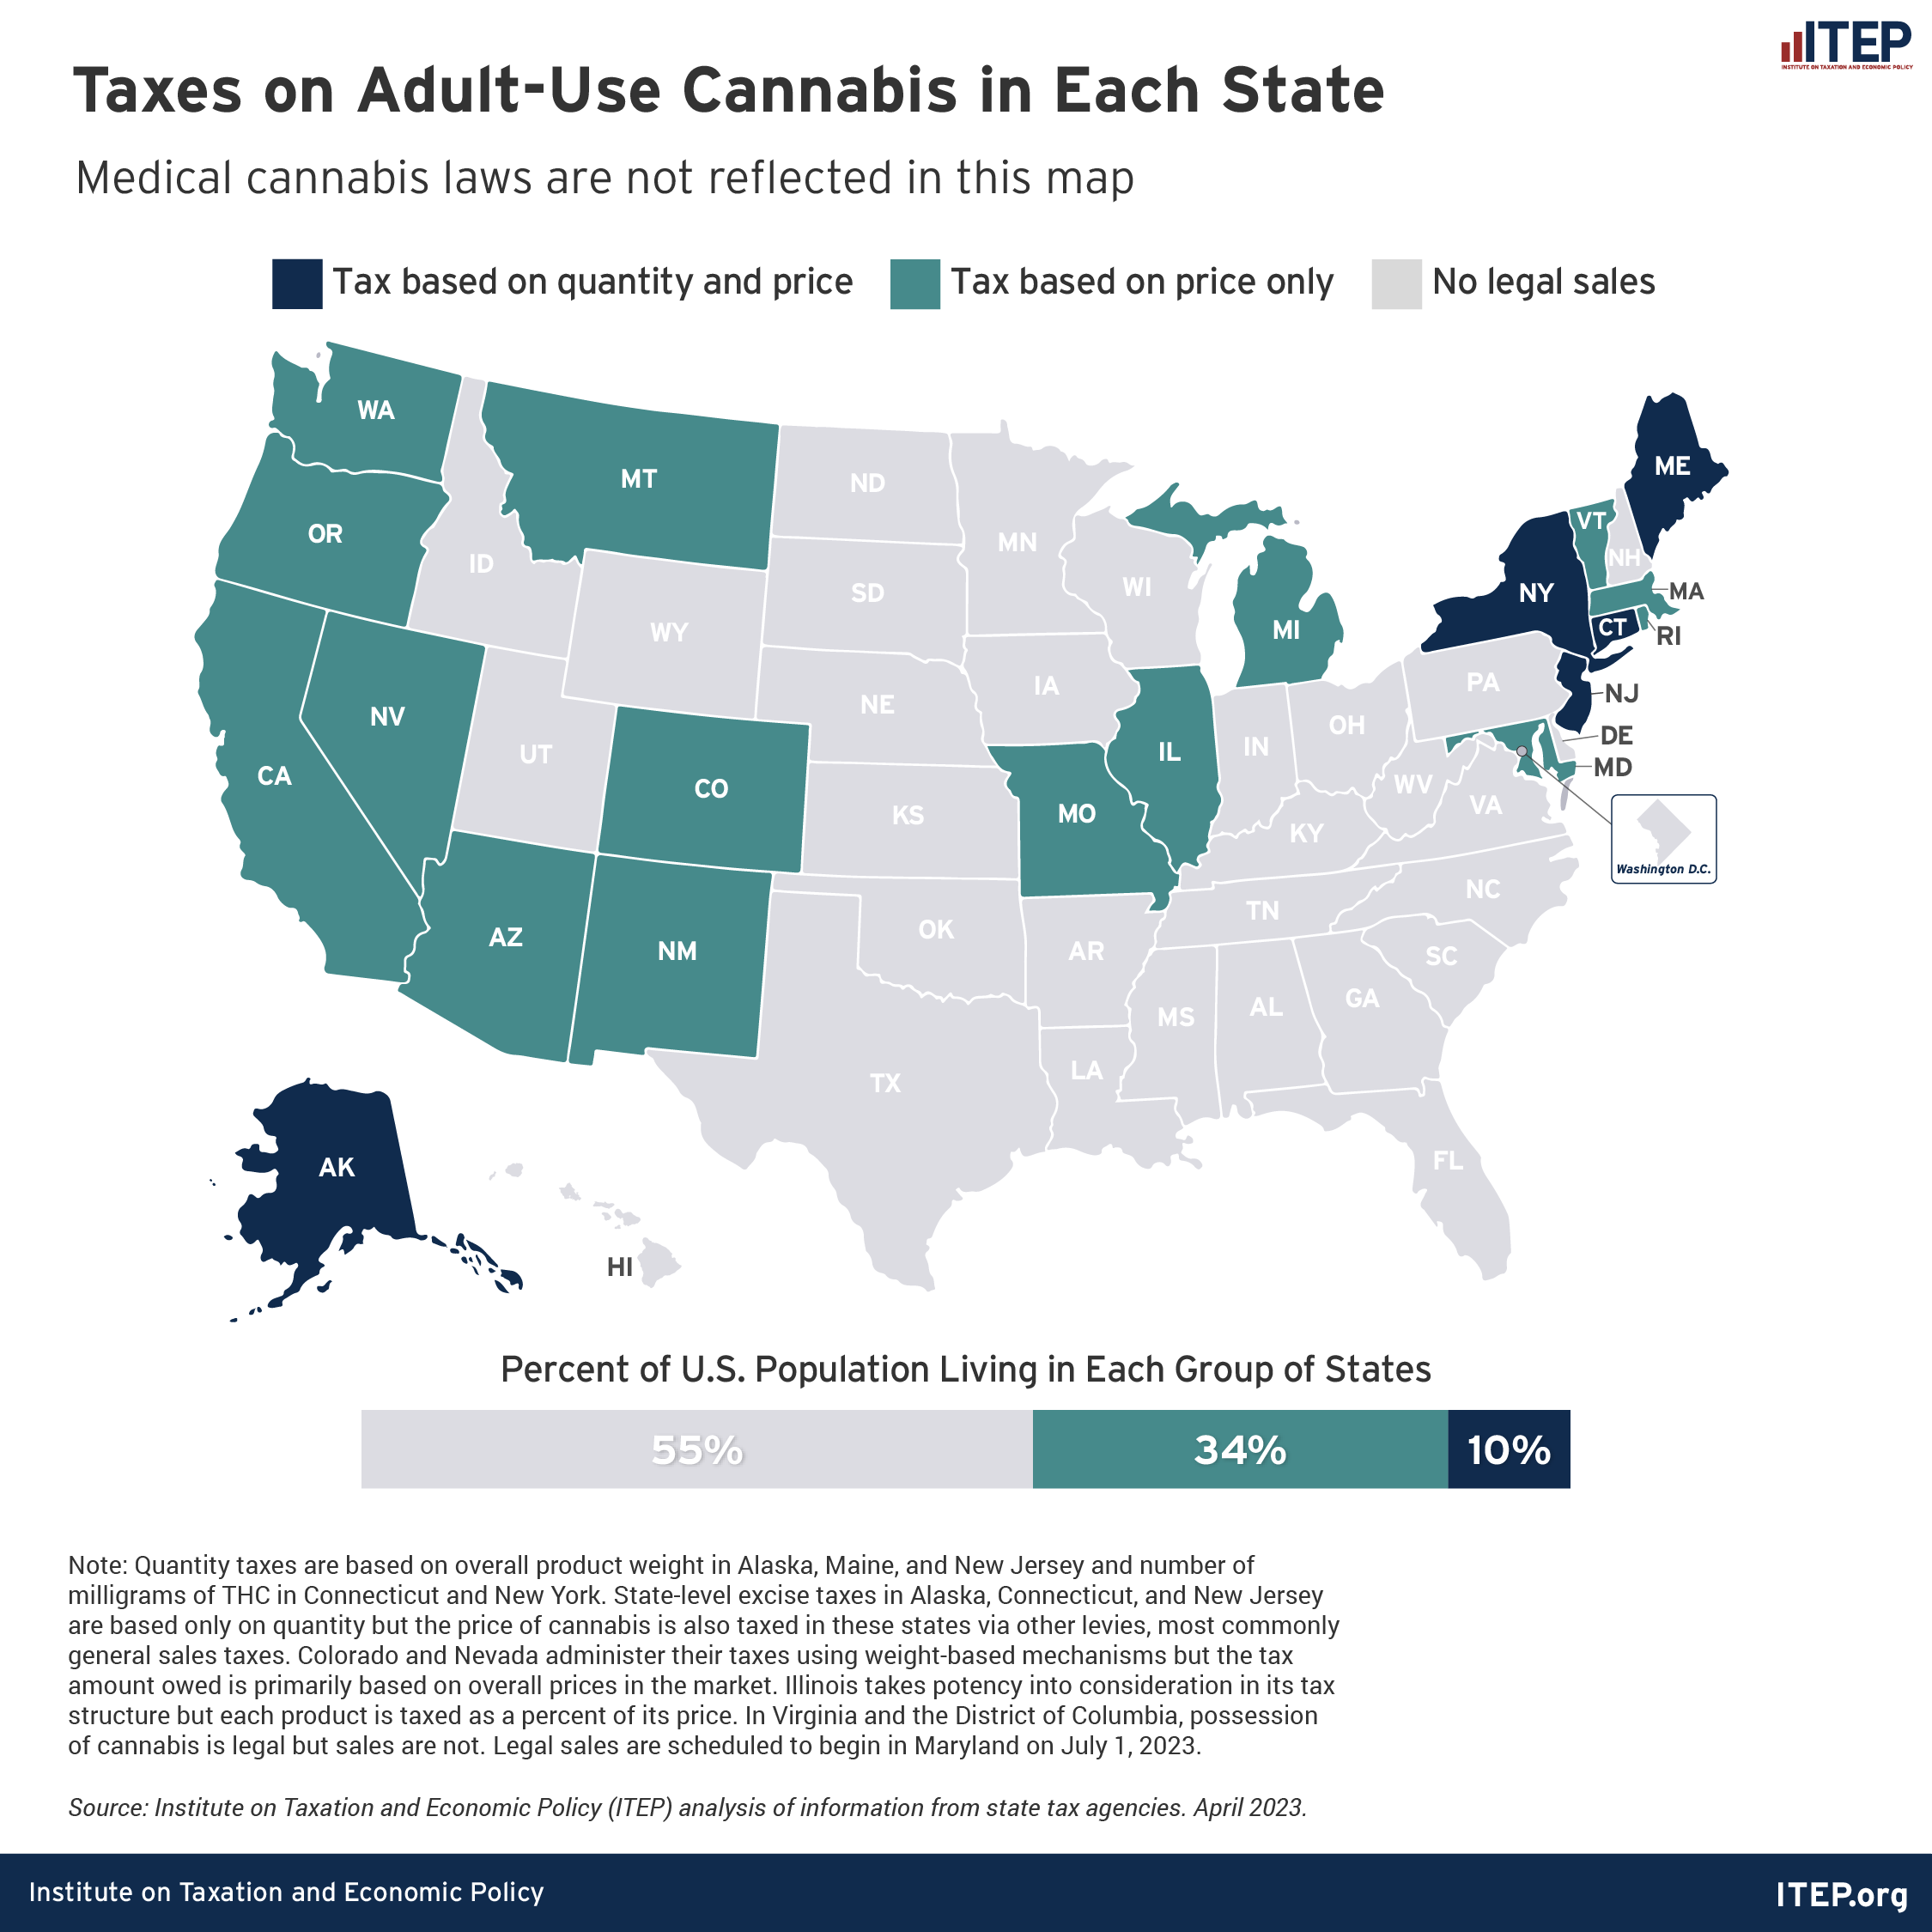 United States map with details of cannabis taxes by state as of April 2023.